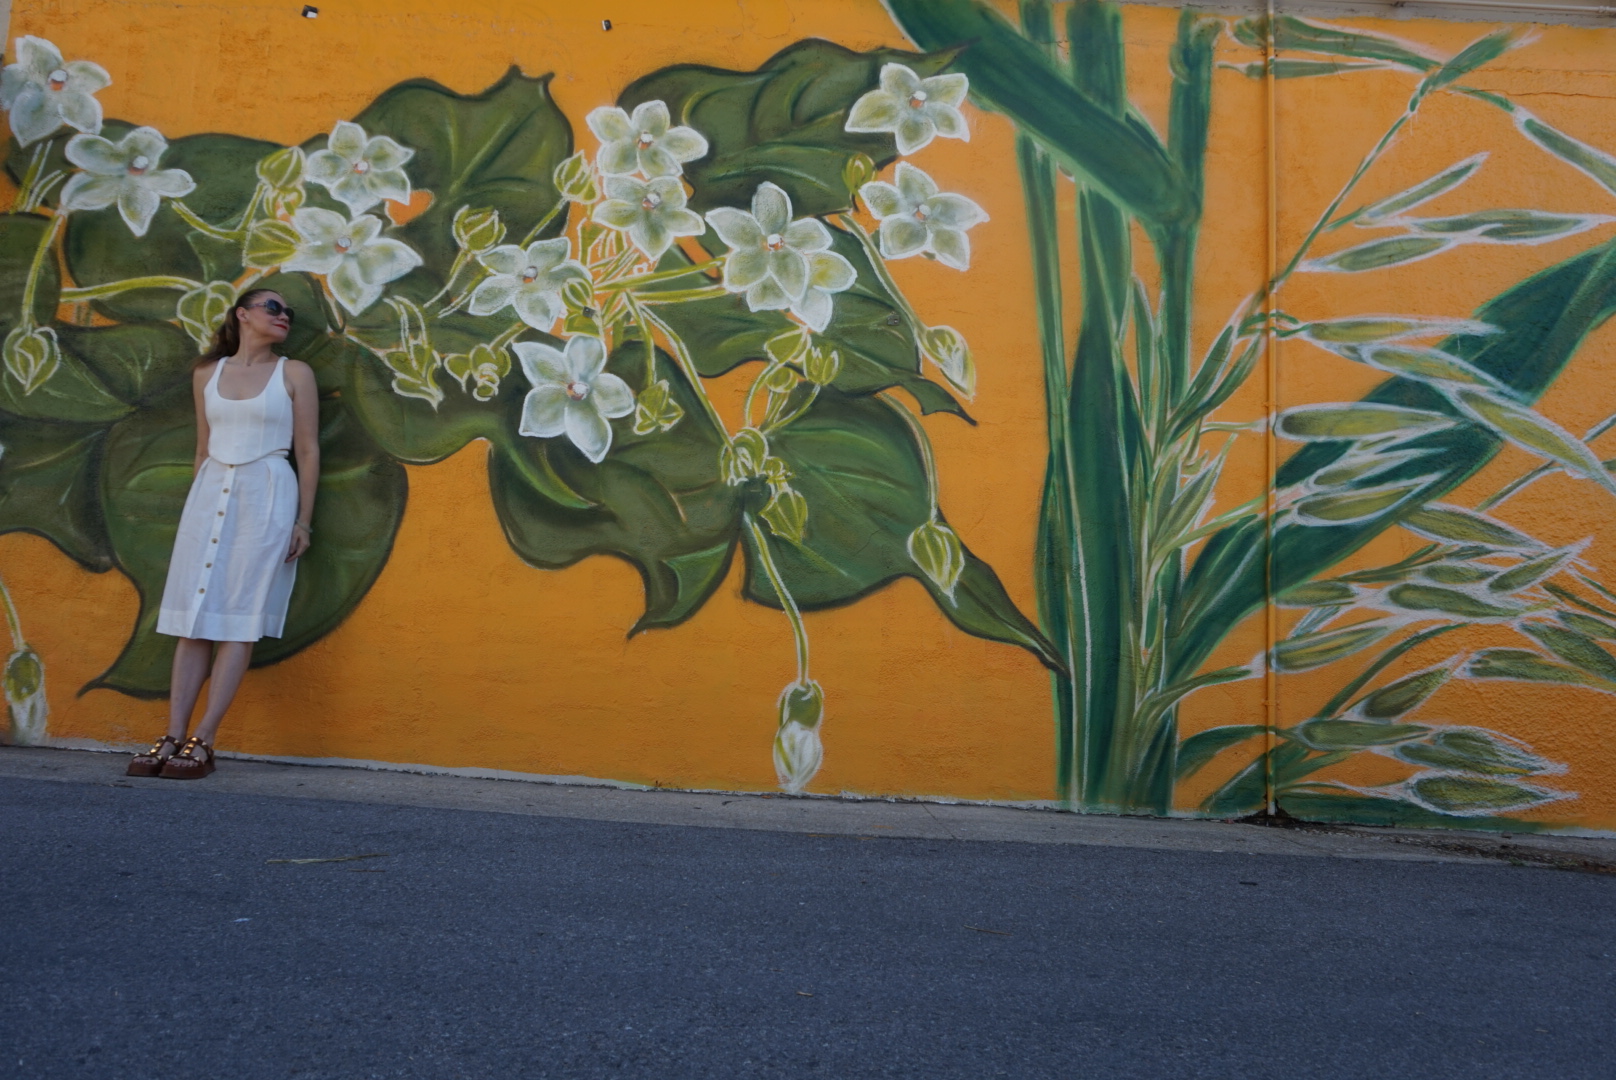 a woman in a white skirt and top in front of a yellow wall with flowers painted on it